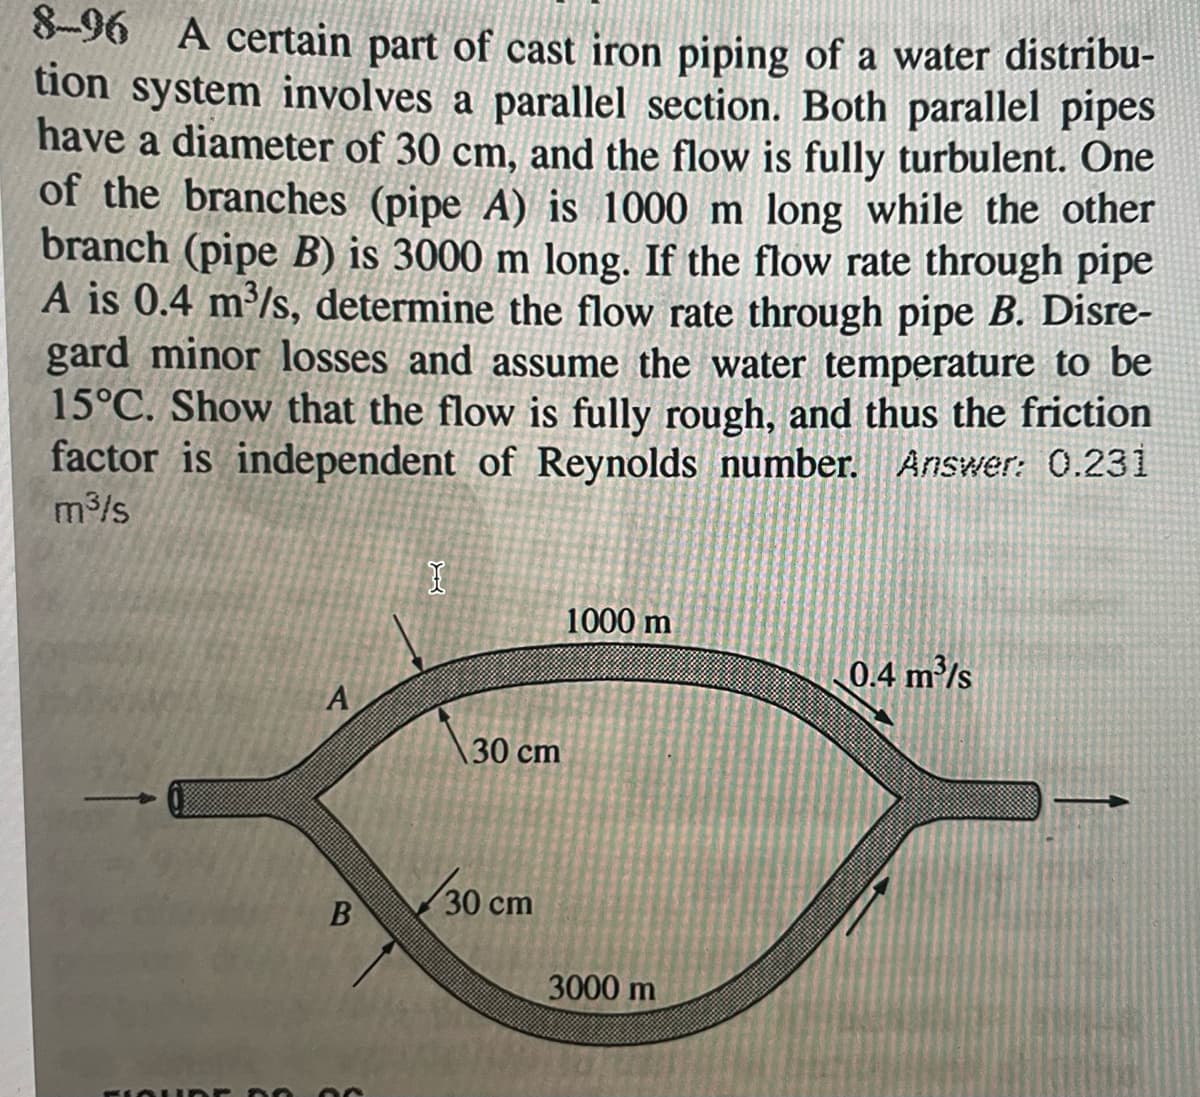 Pipe A) is 100
8-96 A certain part of cast iron piping of a water distribu-
tion system involves a parallel section. Both parallel pipes
have a diameter of 30 cm, and the flow is fully turbulent. One
of the branches (pipe A) is 1000 m long while the other
branch (pipe B) is 3000 m long. If the flow rate through pipe
A is 0.4 m³/s, determine the flow rate through pipe B. Disre-
gard minor losses and assume the water temperature to be
15°C. Show that the flow is fully rough, and thus the friction
factor is independent of Reynolds number. Answer: 0.231
m³/s
KIAU
A
B
I
30 cm
30 cm
1000 m
3000 m
0.4 m³/s